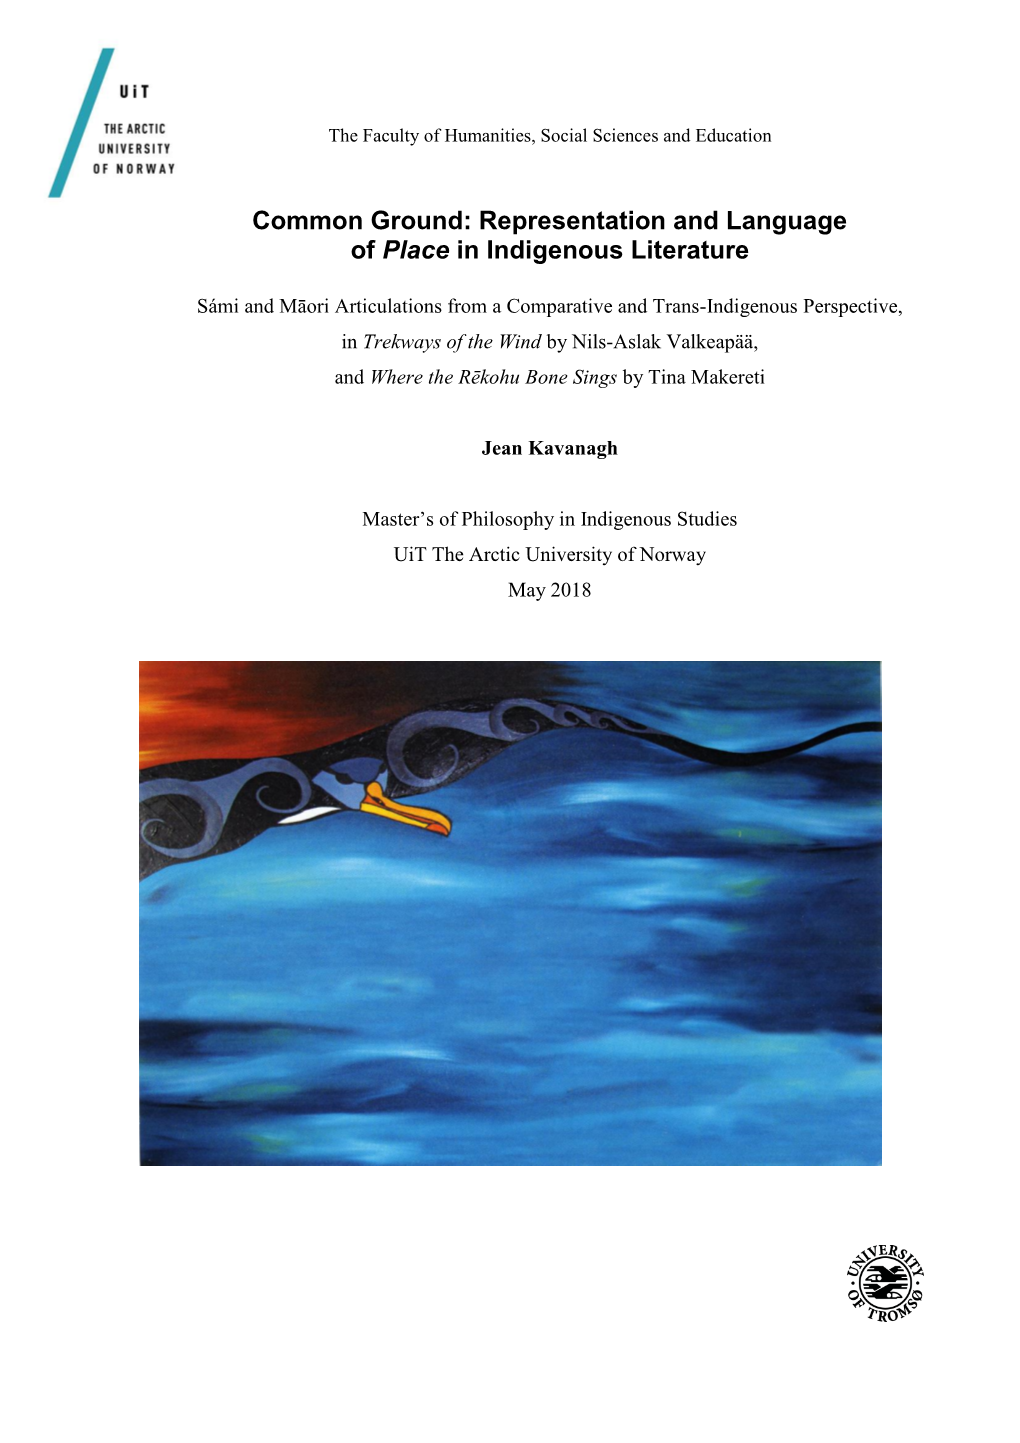 Representation and Language of Place in Indigenous Literature